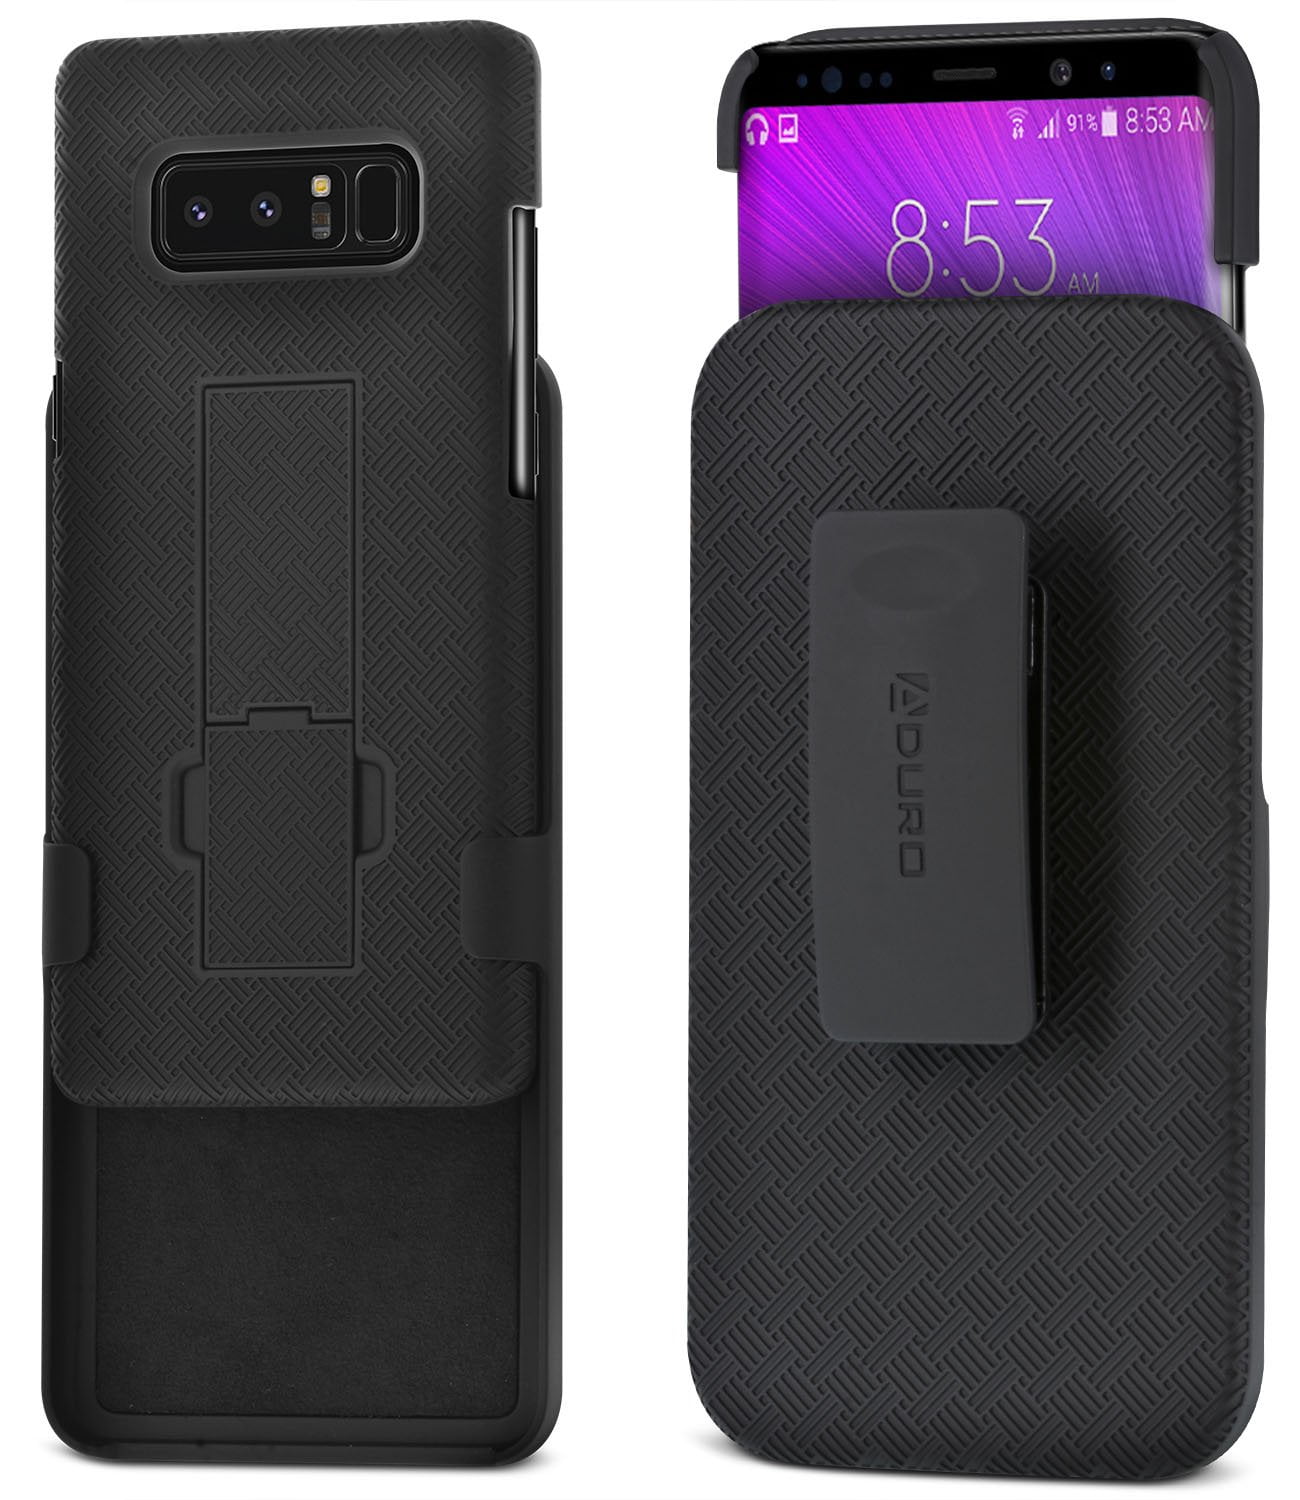 Aduro Samsung Galaxy S8 Plus Holster Shell Case Black COMBO Series Super Slim Shell Case with Built-In Kickstand and Swivel Belt Clip Holster for Samsung Galaxy S8 Plus